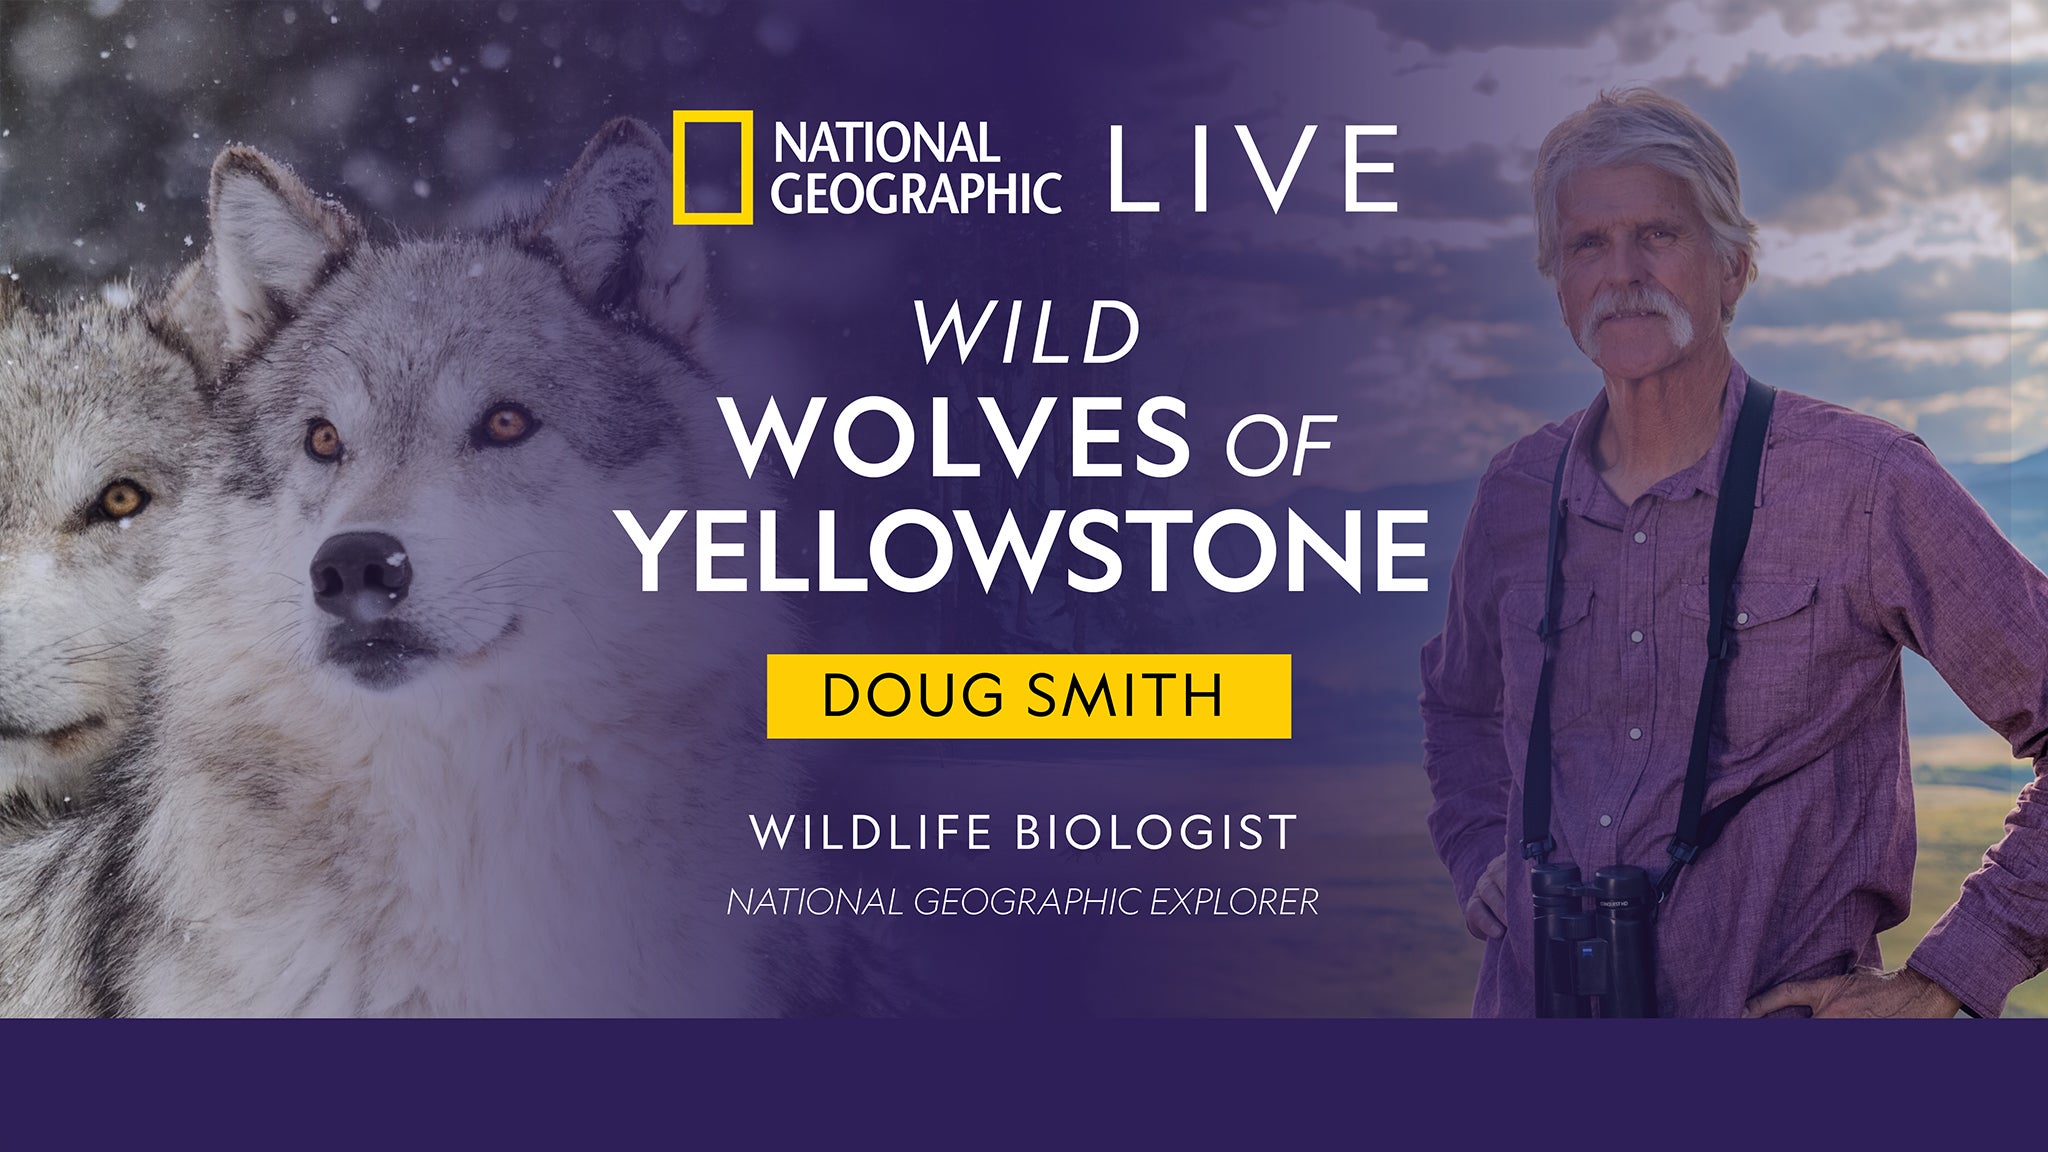 National Geographic Live - Wild Wolves of Yellowstone STUDENT MATINEE